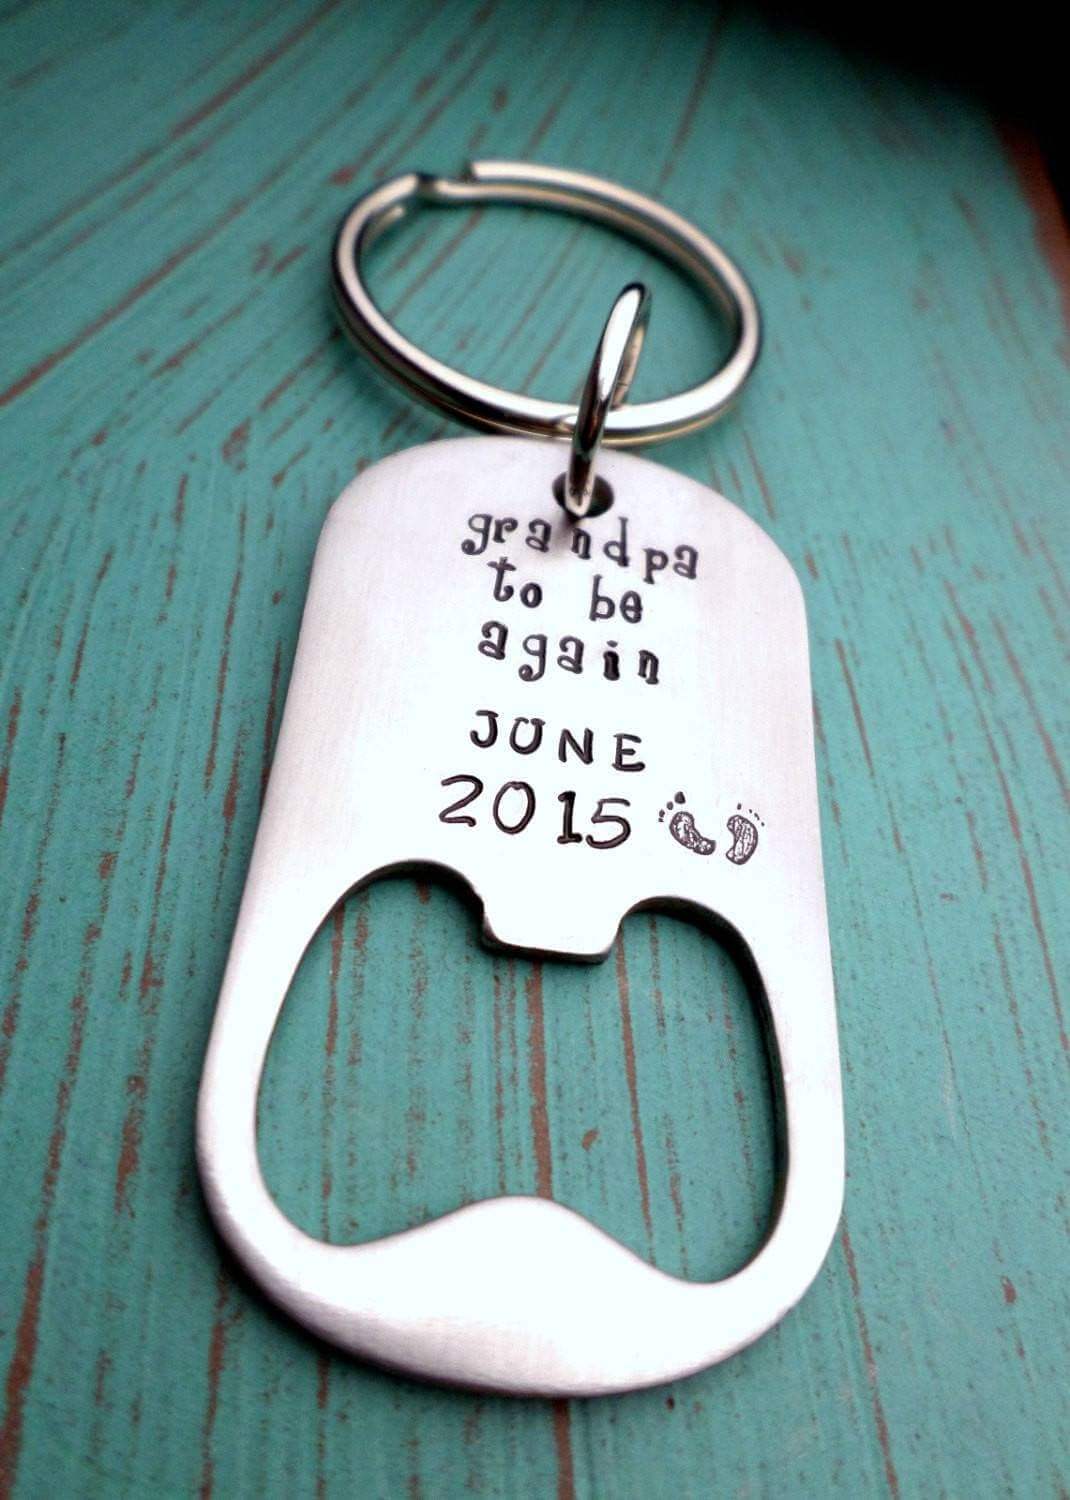 Grandpa To Be Gift, Birth Announcement, Best Dad, Father's  Keychain, Fathers Day Gift, Gift for Dad, Bottle Openers, HandmadeLoveStories, HandmadeLoveStories , [Handmade_Love_Stories], [Hand_Stamped_Jewelry], [Etsy_Stamped_Jewelry], [Etsy_Jewelry]